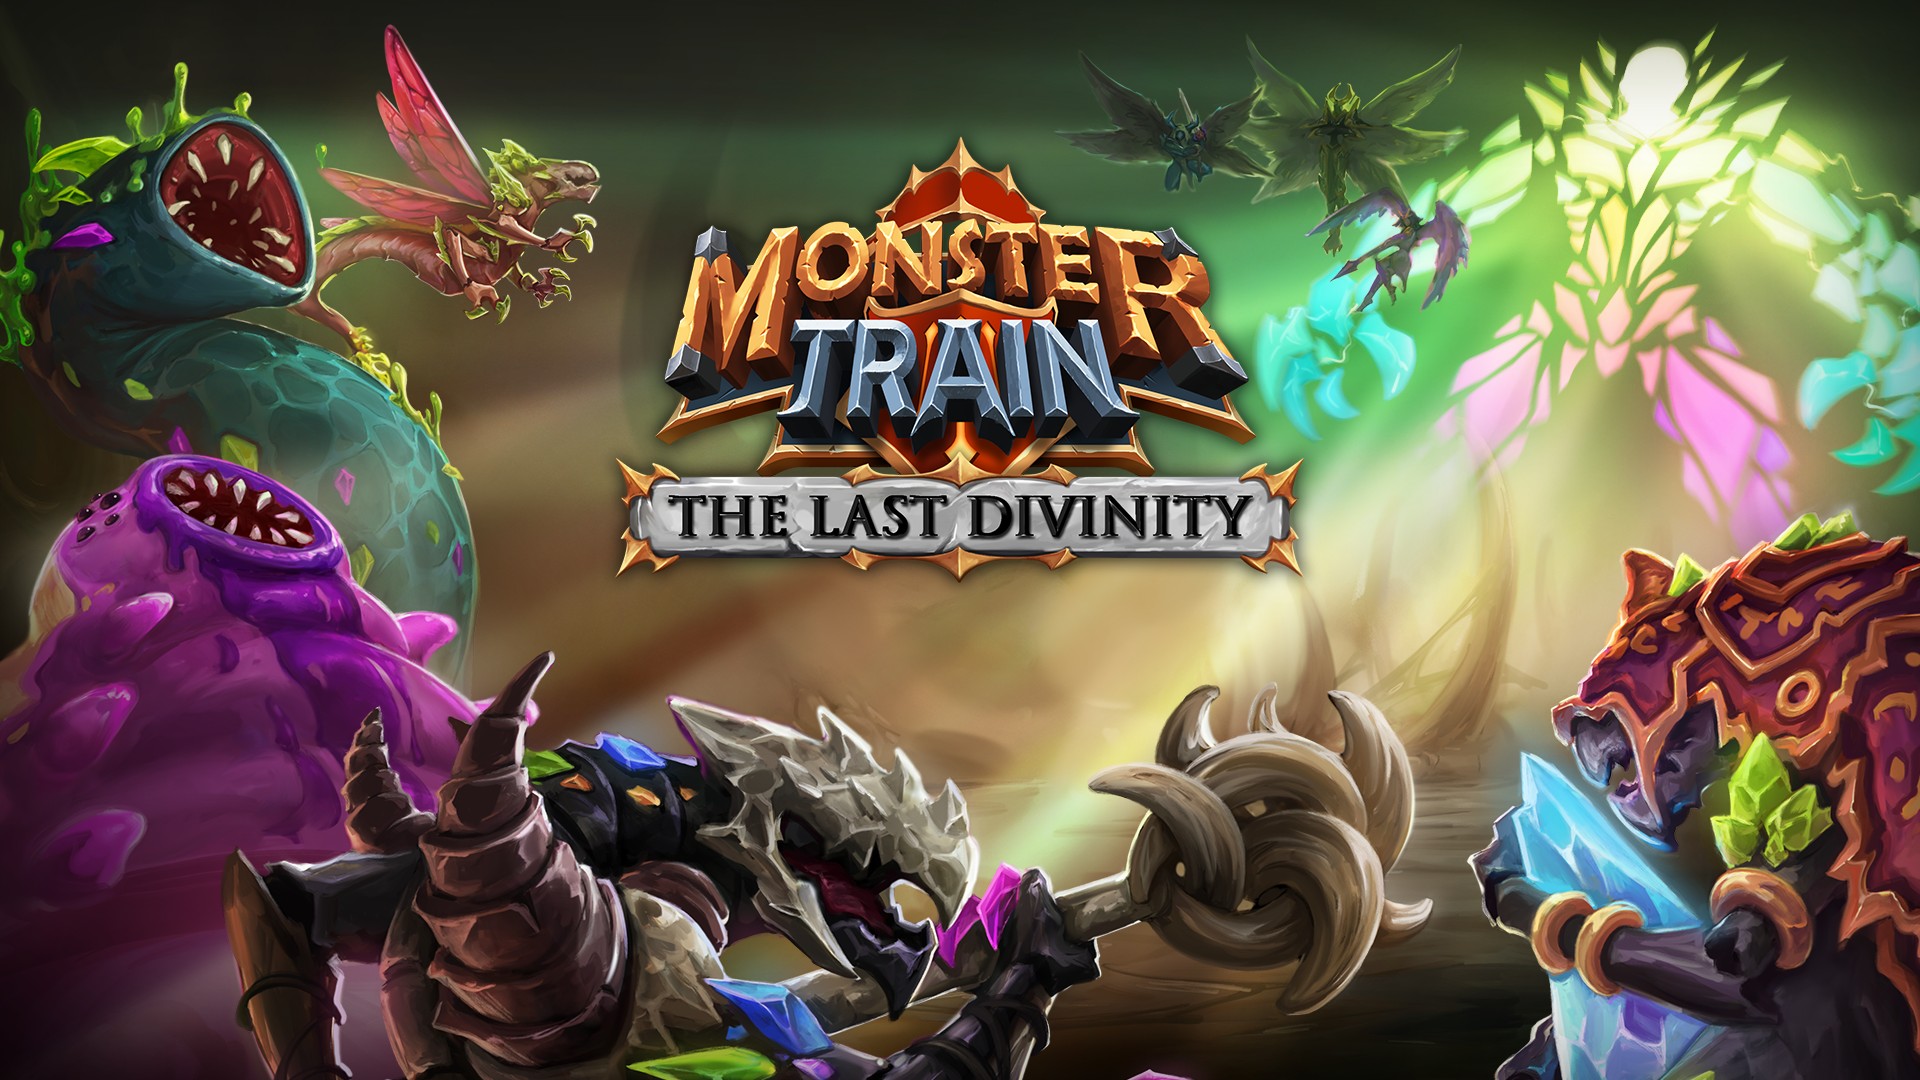 Video For Monster Train: The Last Divinity DLC Available Now